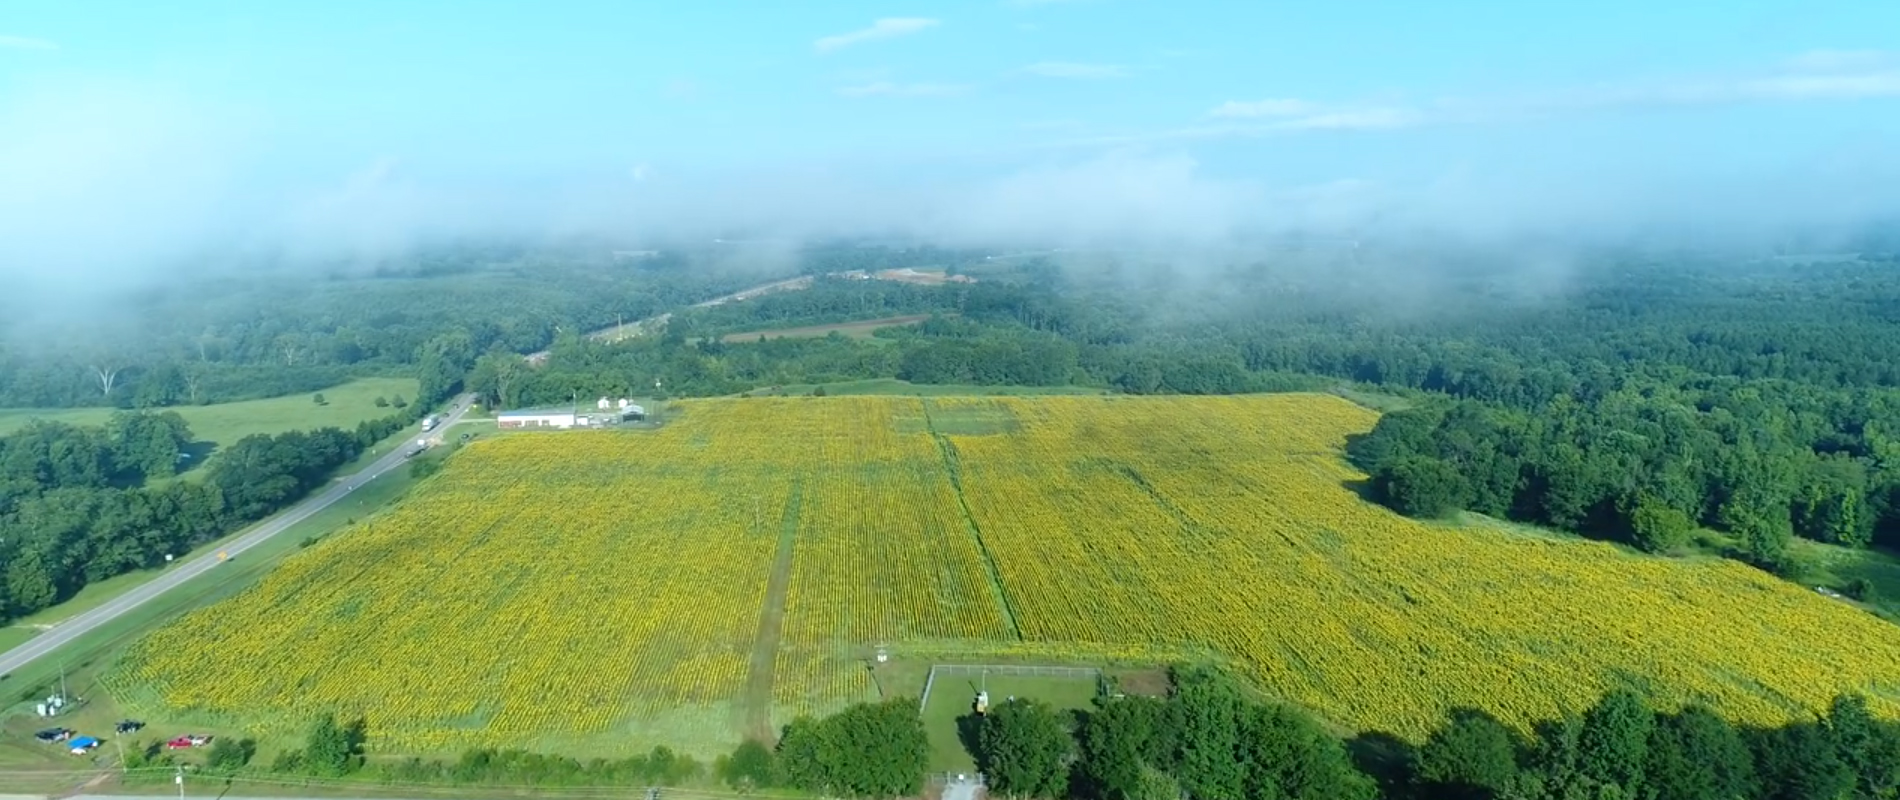 Autaugaville Sunflower Field To Bloom in mid to late August!